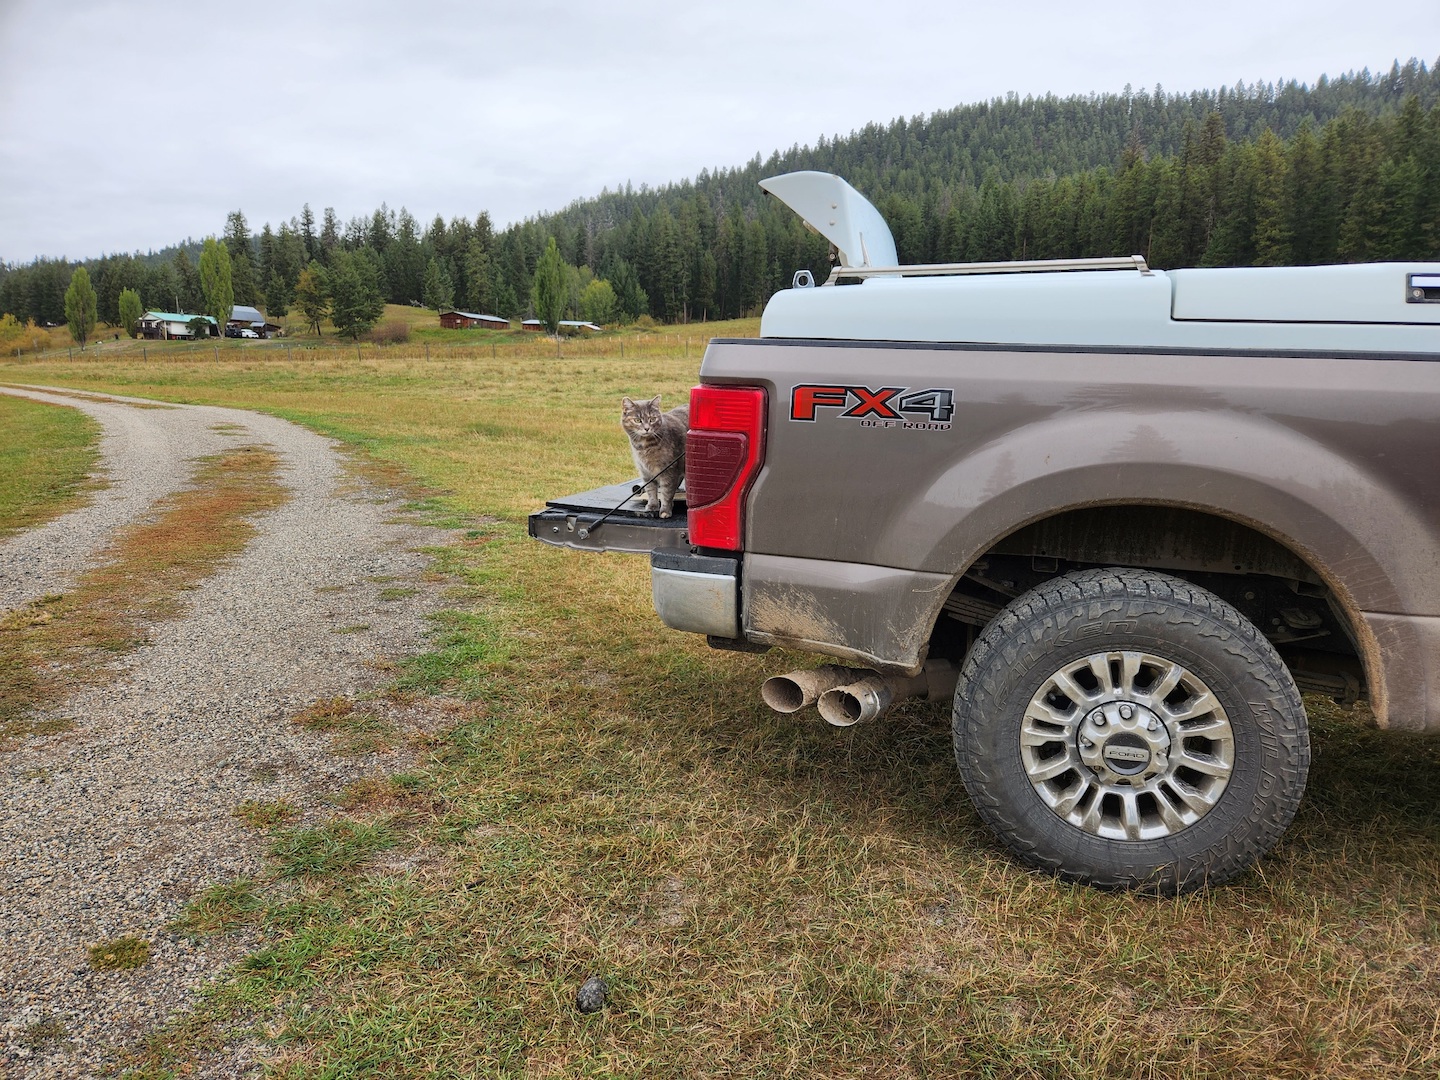 photo of a Ford truck's back end from the side, parked in a field, with a grey cat sitting on the tailgate among some farrier tools.